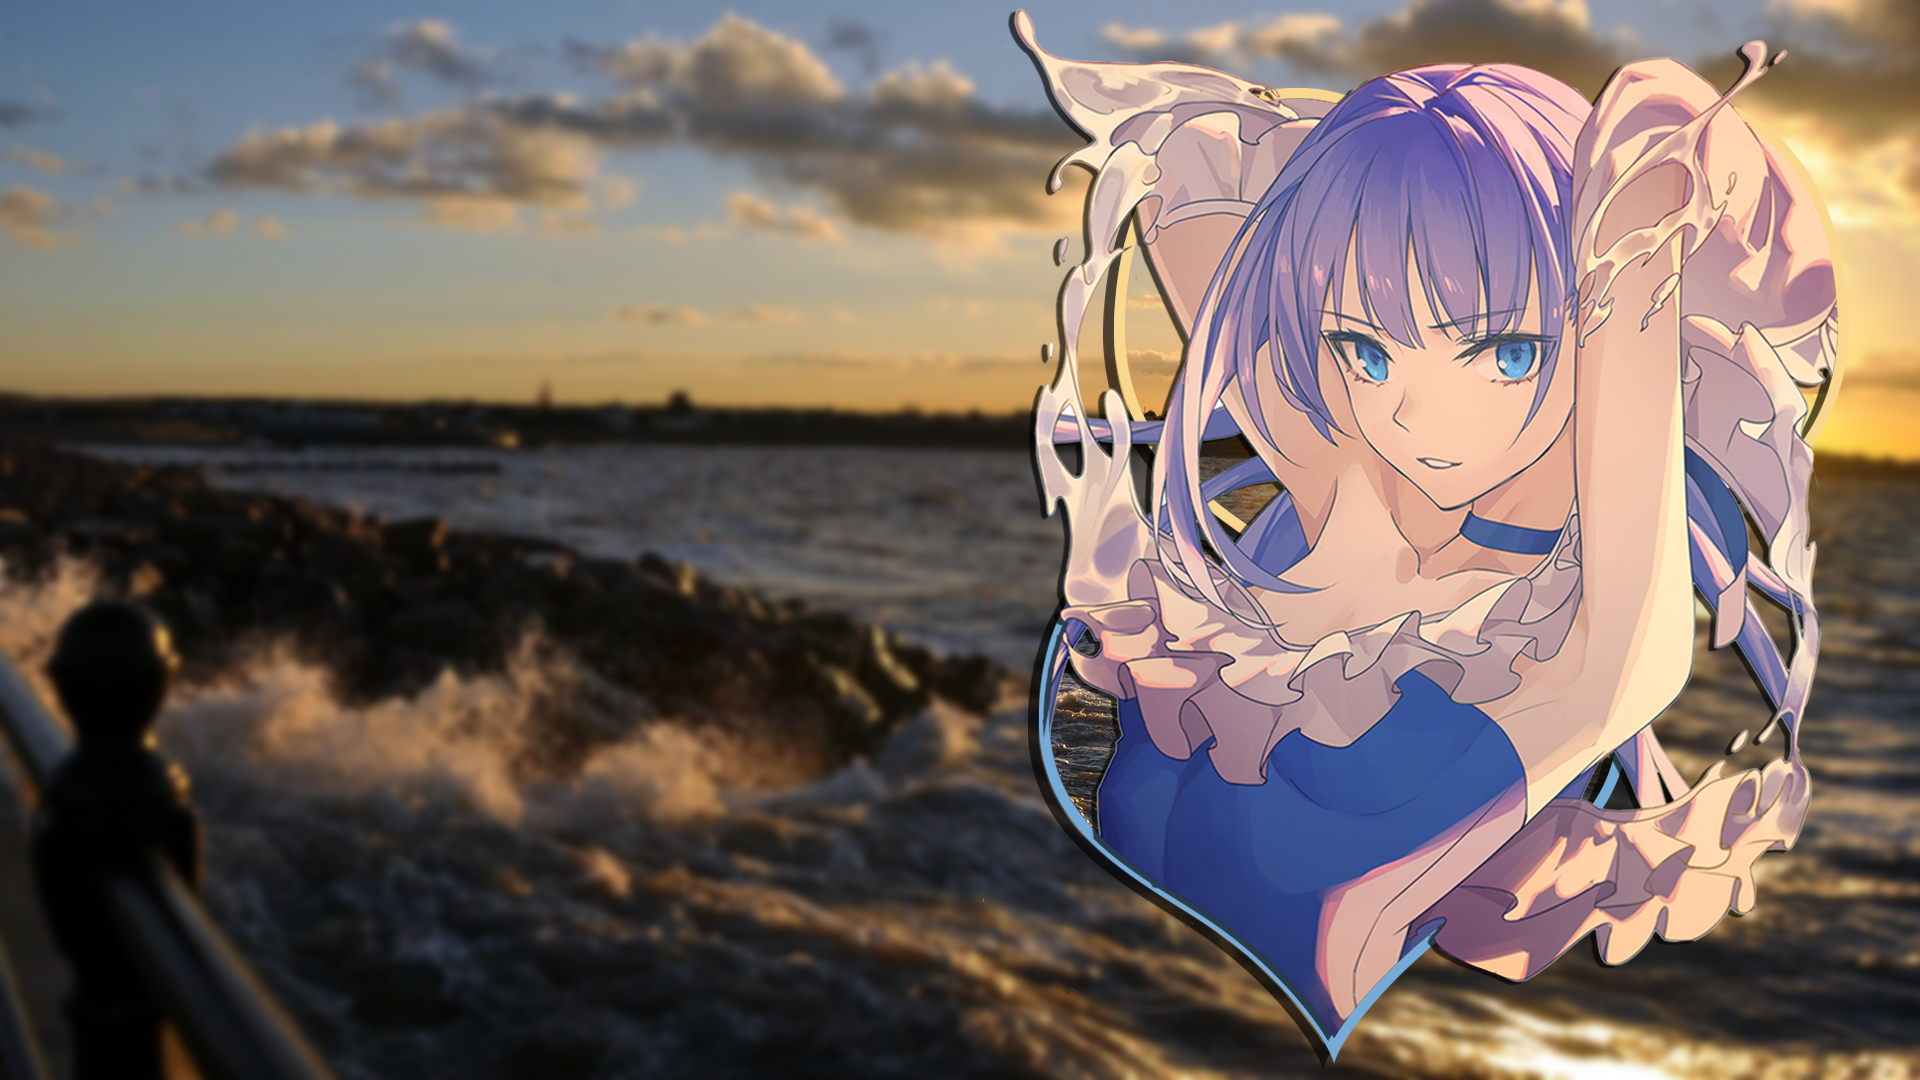 Anime 1920x1080 beach sunset Meltlilith Fate series picture-in-picture Fate/Grand Order anime girls